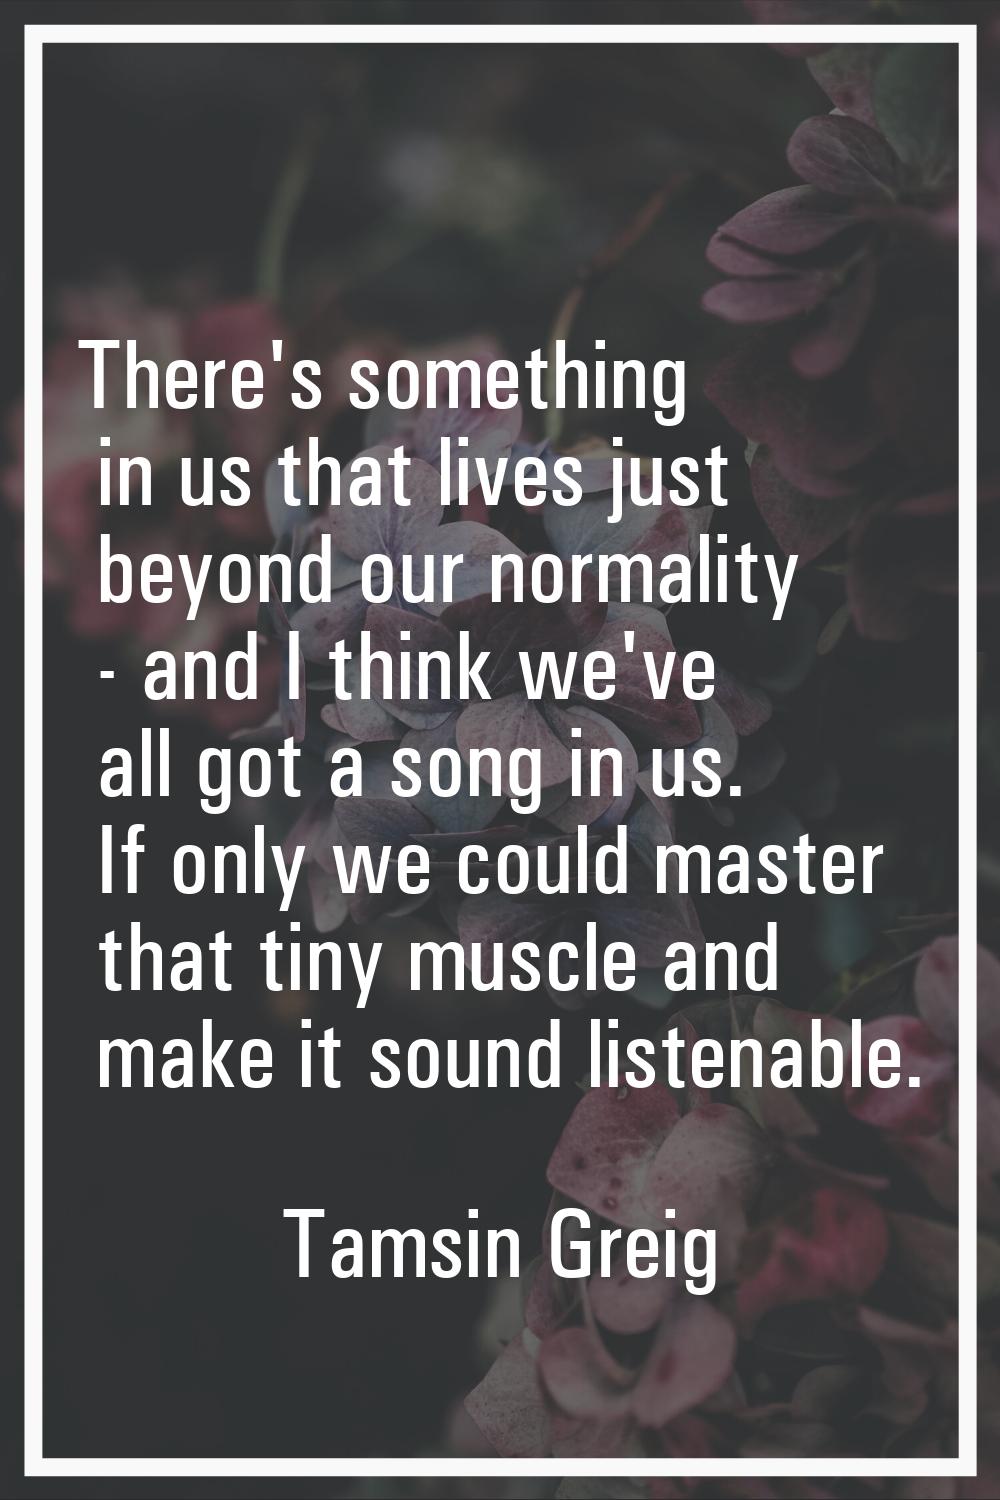 There's something in us that lives just beyond our normality - and I think we've all got a song in 